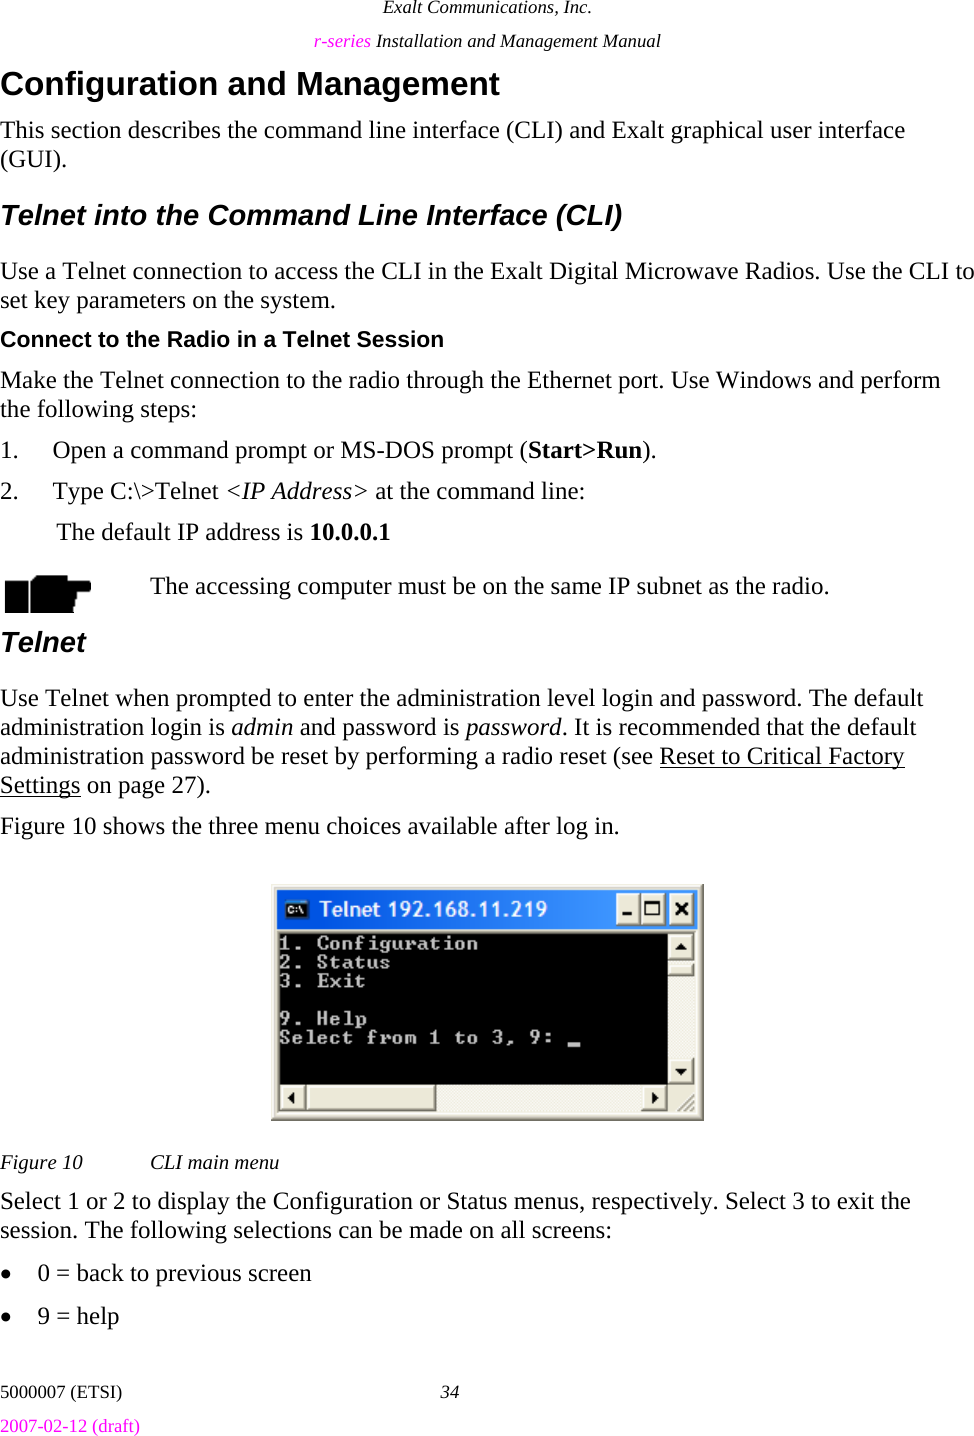 Exalt Communications, Inc. r-series Installation and Management Manual 5000007 (ETSI)  34 2007-02-12 (draft)  Configuration and Management This section describes the command line interface (CLI) and Exalt graphical user interface (GUI). Telnet into the Command Line Interface (CLI) Use a Telnet connection to access the CLI in the Exalt Digital Microwave Radios. Use the CLI to set key parameters on the system. Connect to the Radio in a Telnet Session Make the Telnet connection to the radio through the Ethernet port. Use Windows and perform the following steps: 1. Open a command prompt or MS-DOS prompt (Start&gt;Run). 2. Type C:\&gt;Telnet &lt;IP Address&gt; at the command line: The default IP address is 10.0.0.1 The accessing computer must be on the same IP subnet as the radio. Telnet Use Telnet when prompted to enter the administration level login and password. The default administration login is admin and password is password. It is recommended that the default administration password be reset by performing a radio reset (see Reset to Critical Factory Settings on page 27). Figure 10 shows the three menu choices available after log in. Figure 10  CLI main menu Select 1 or 2 to display the Configuration or Status menus, respectively. Select 3 to exit the session. The following selections can be made on all screens: • 0 = back to previous screen • 9 = help 